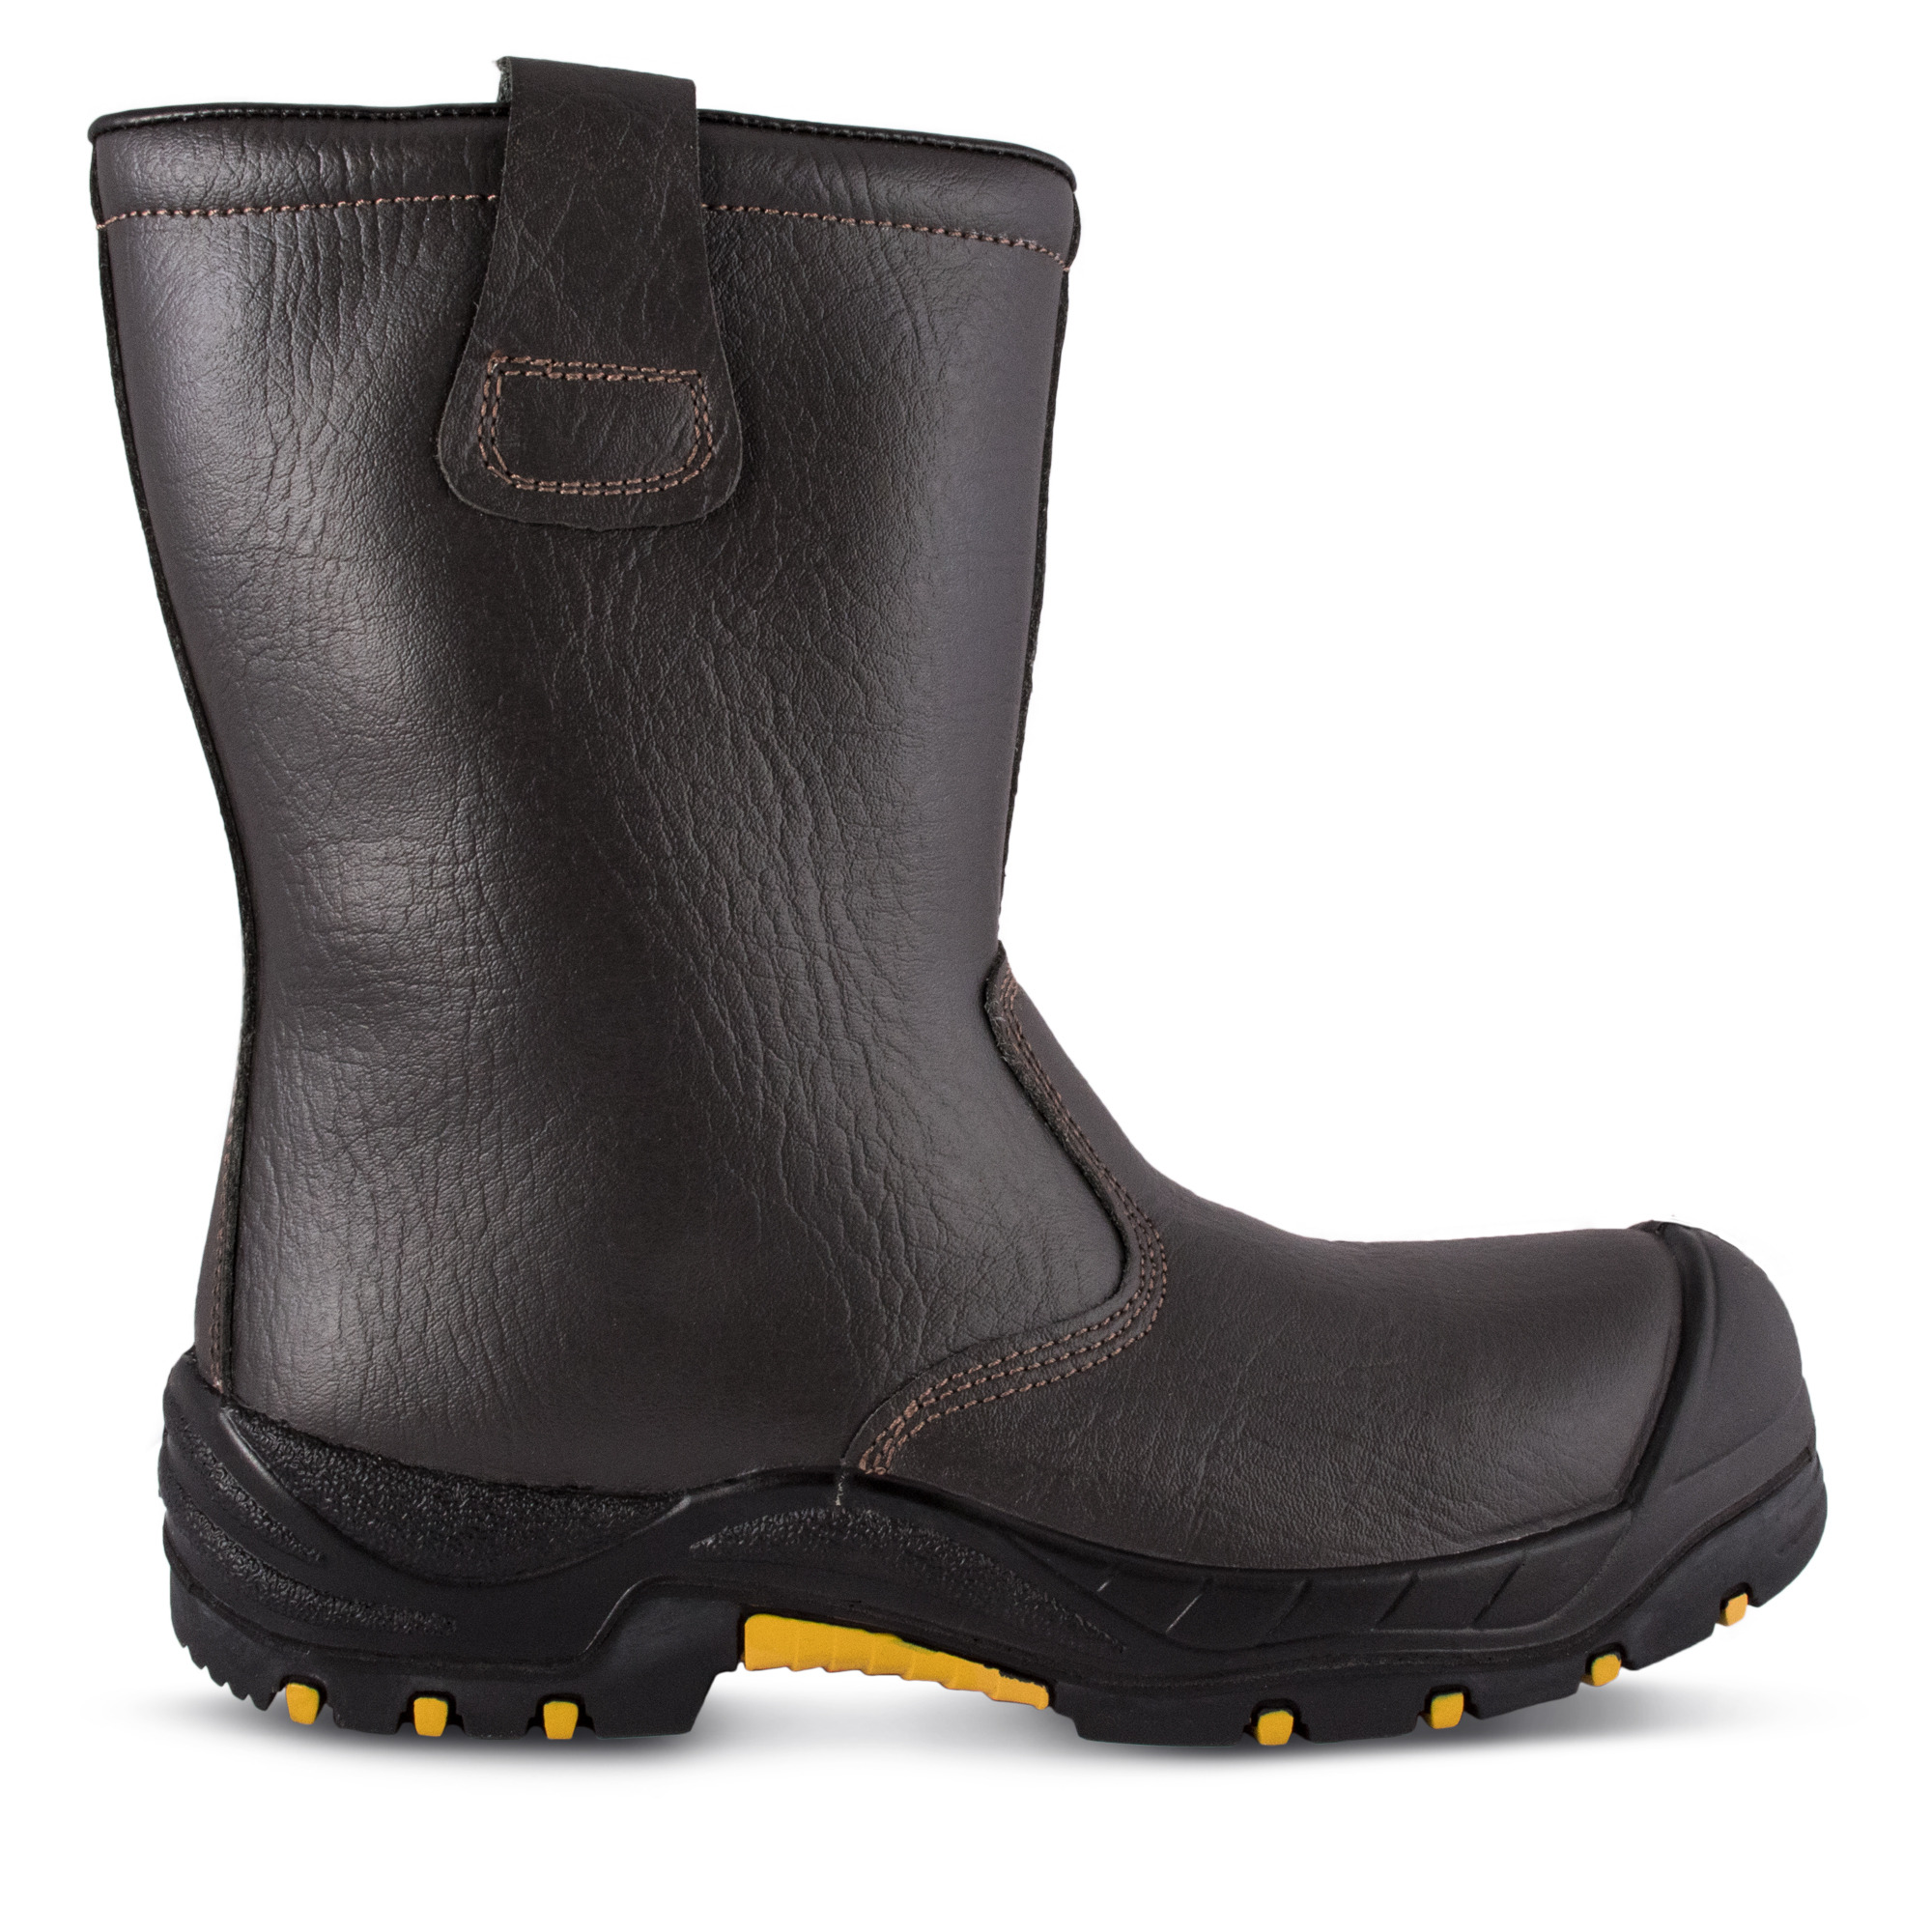 Top Rigger Boots | vlr.eng.br